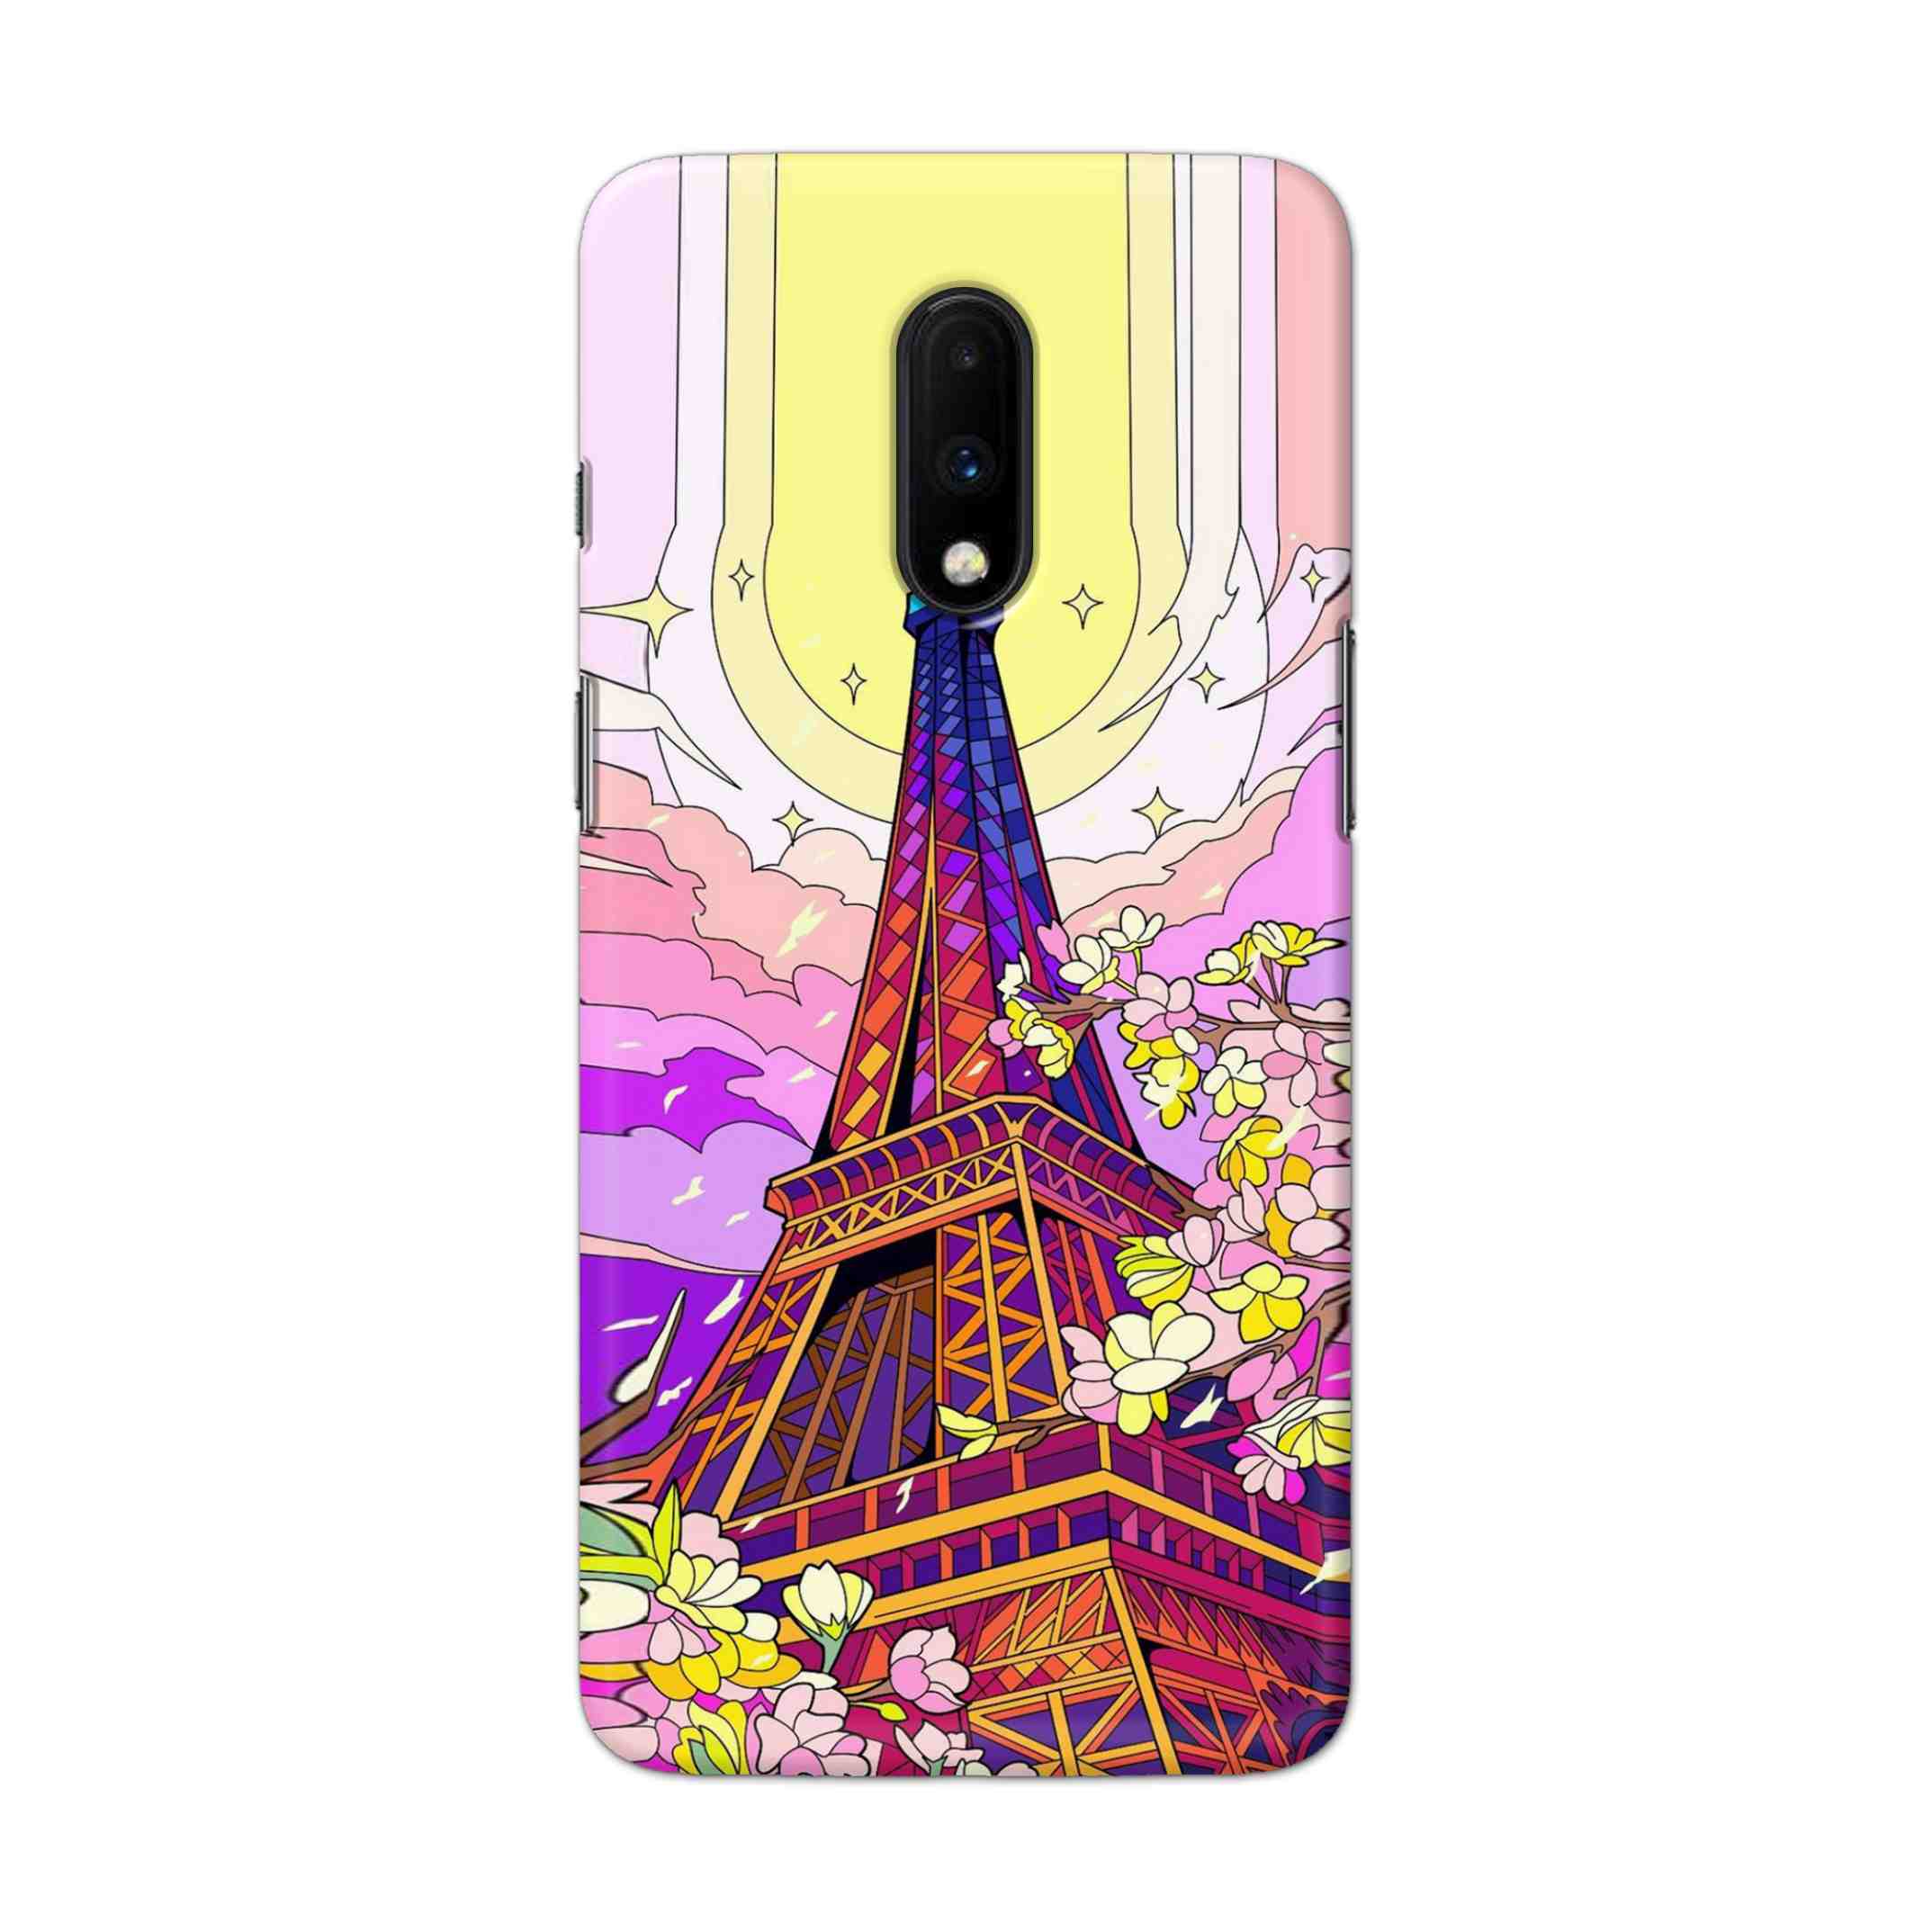 Buy Eiffel Tower Hard Back Mobile Phone Case Cover For OnePlus 7 Online